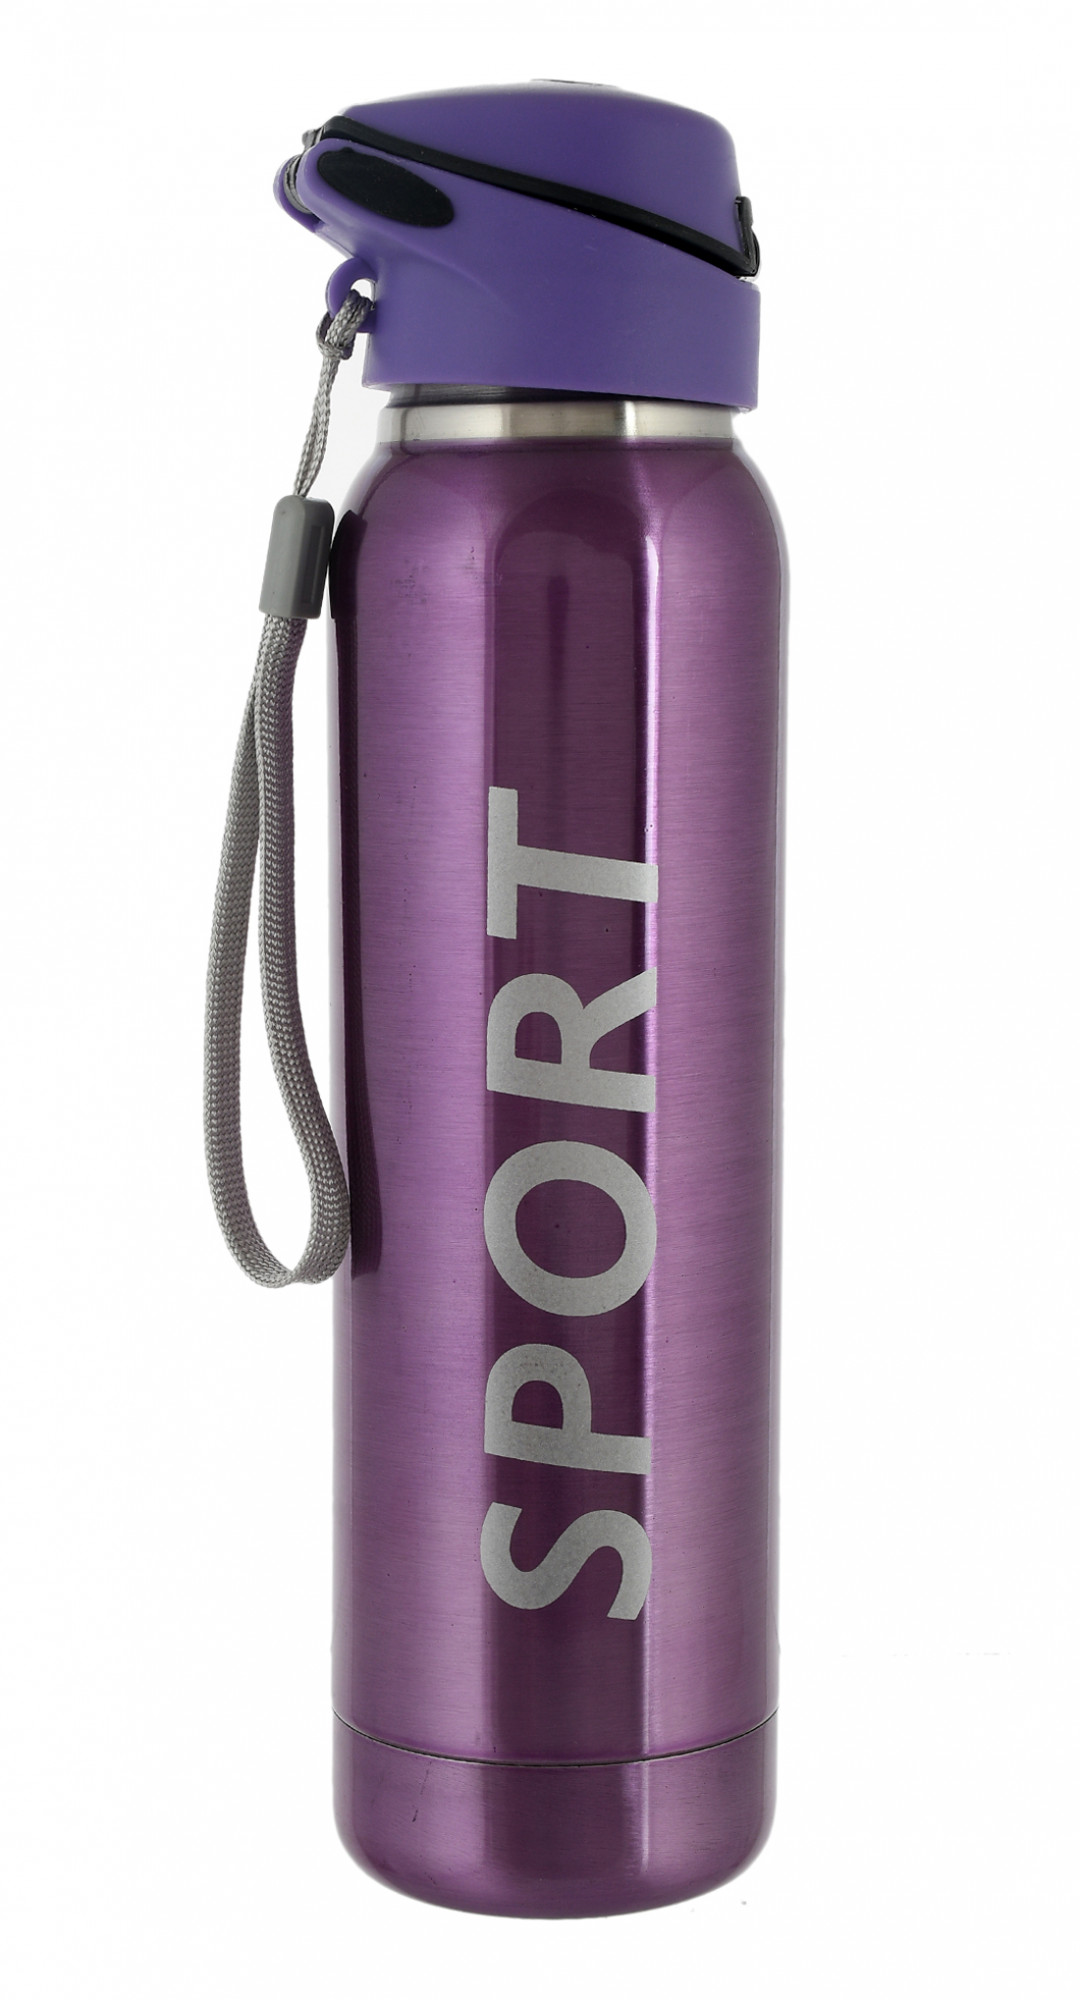 Kuber Industries Stainless Steel BPA Free Drinking Bottle, Hot & Cold Bottle, Ideal for Sports, Bike, Running, Hiking With Sipper & Push Button on Lid, 500ml (Pruple)-HS_38_KUBMART21735